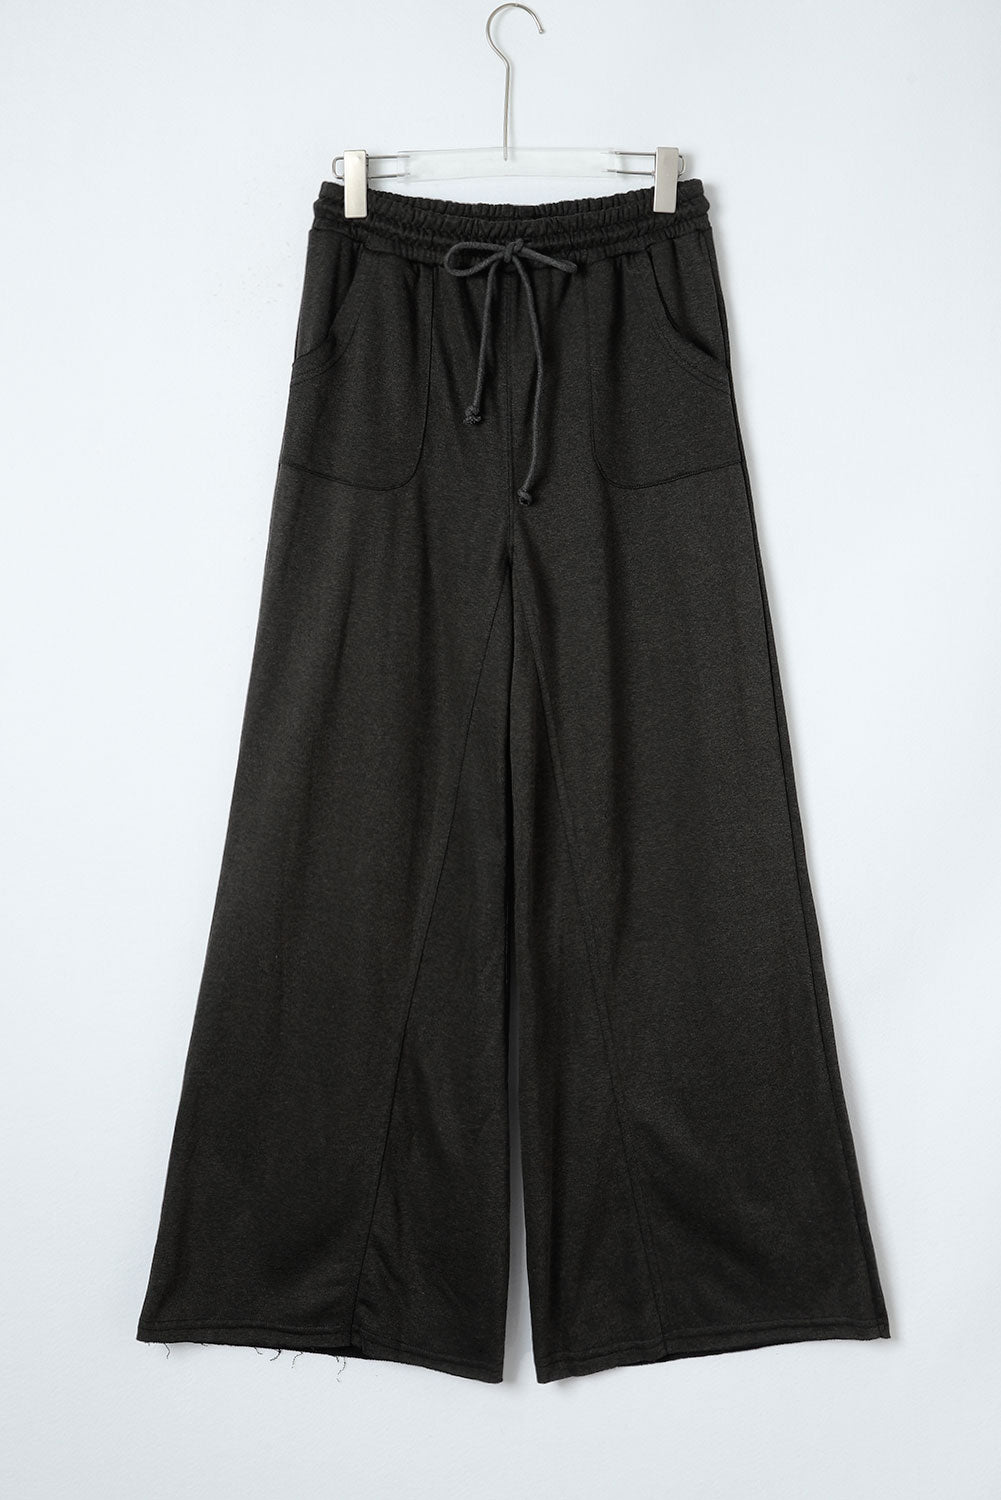 Mineral Washed Drawstring High Waisted Wide Leg Pants